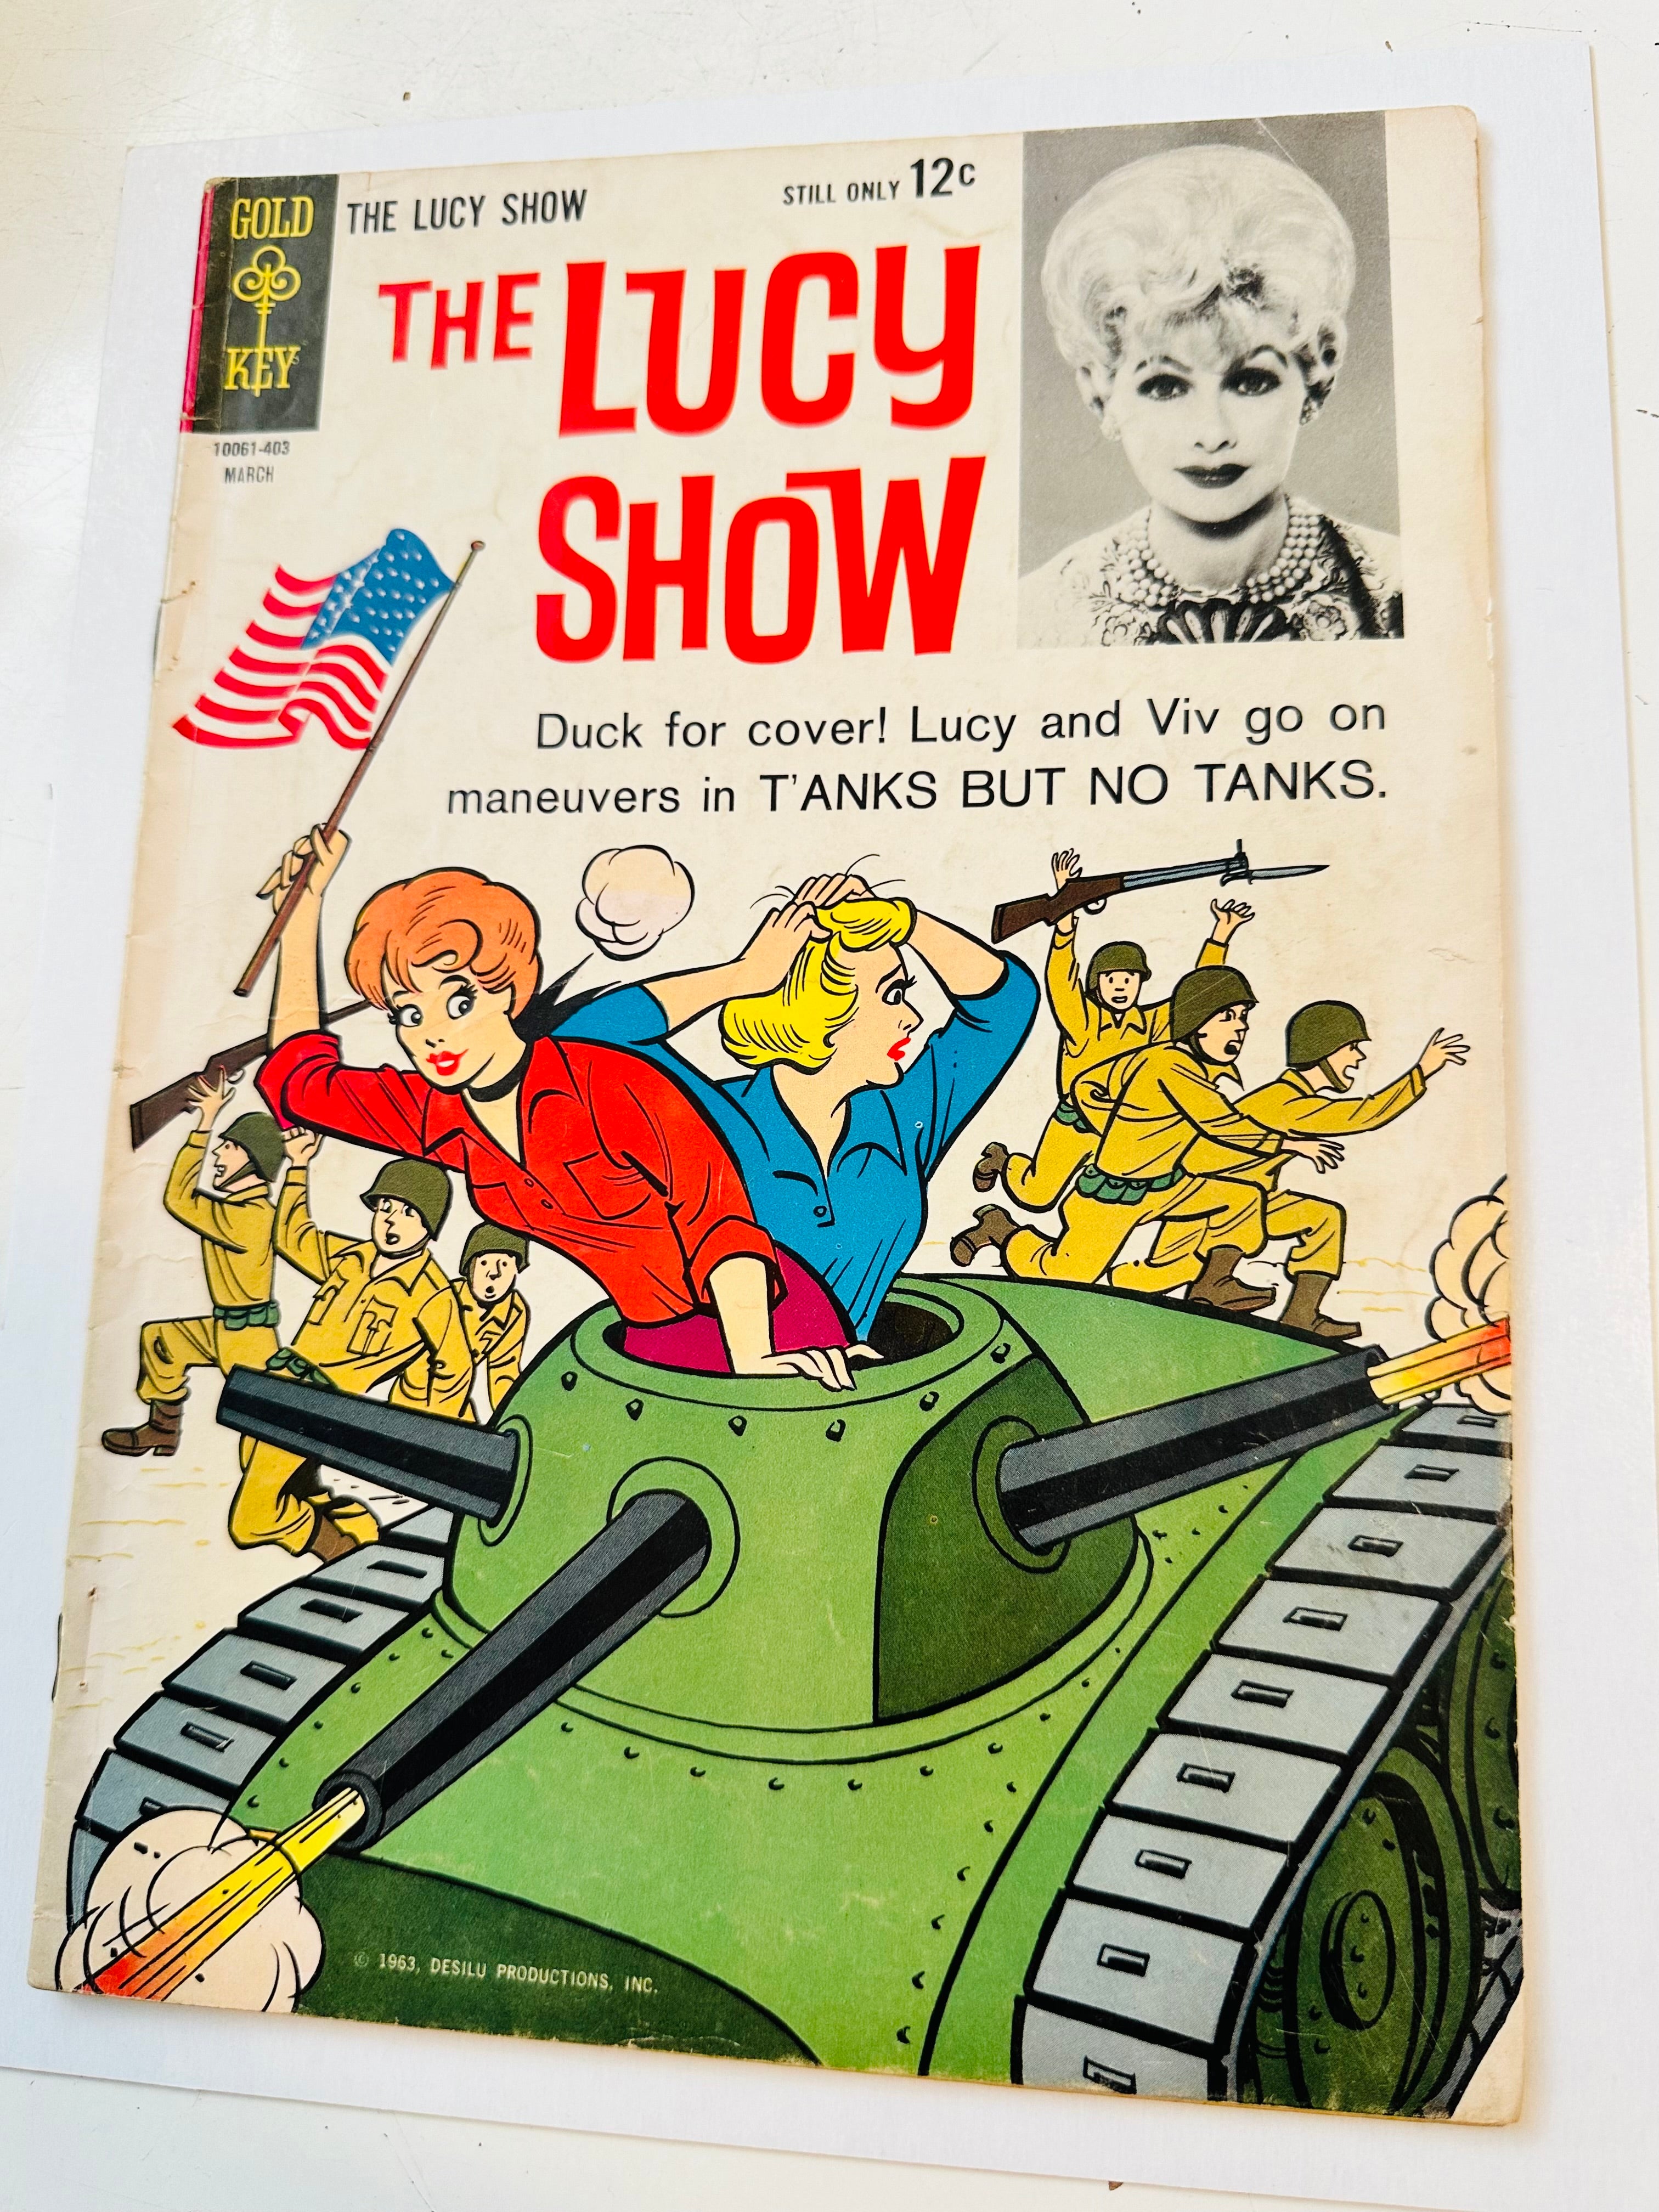 The Lucy show vintage gold key, book 1964